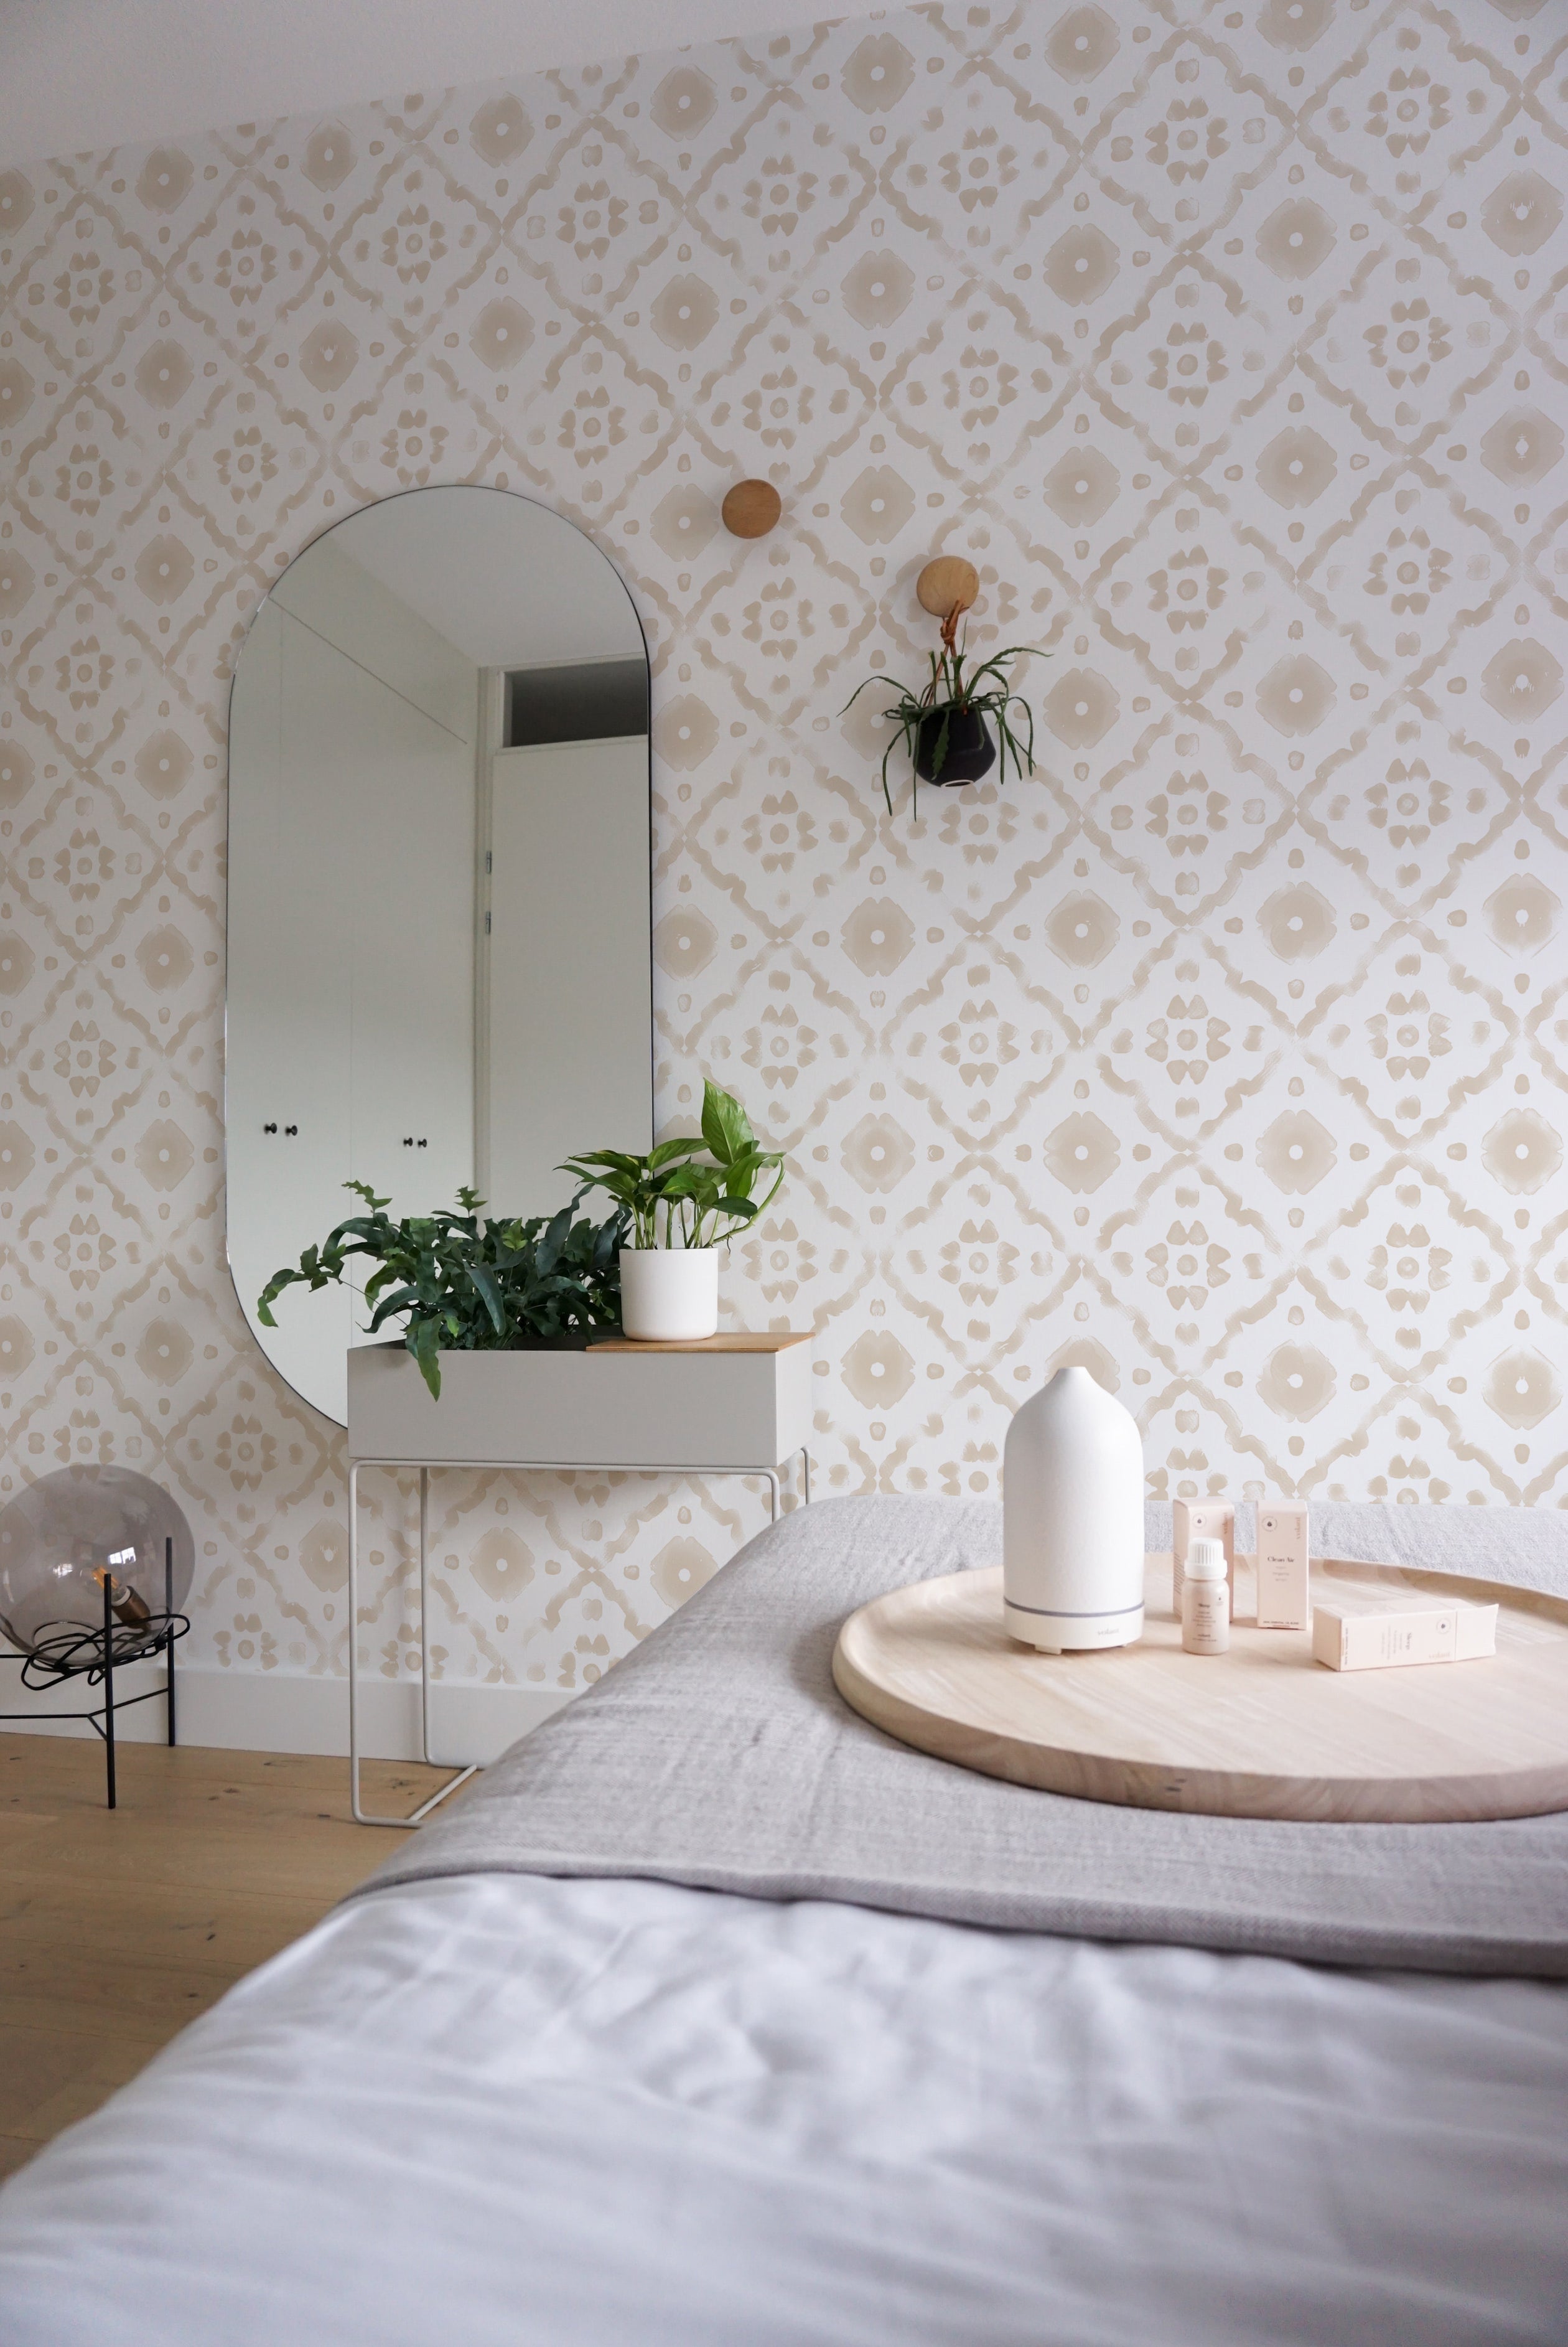 A cozy bedroom setting enhanced by Euclid Wallpaper, which covers the wall behind a bed and a small shelf with a decorative mirror and green houseplants. The wallpaper's soft beige geometric patterns on white provide a calm and inviting backdrop, complementing the room’s relaxed atmosphere.